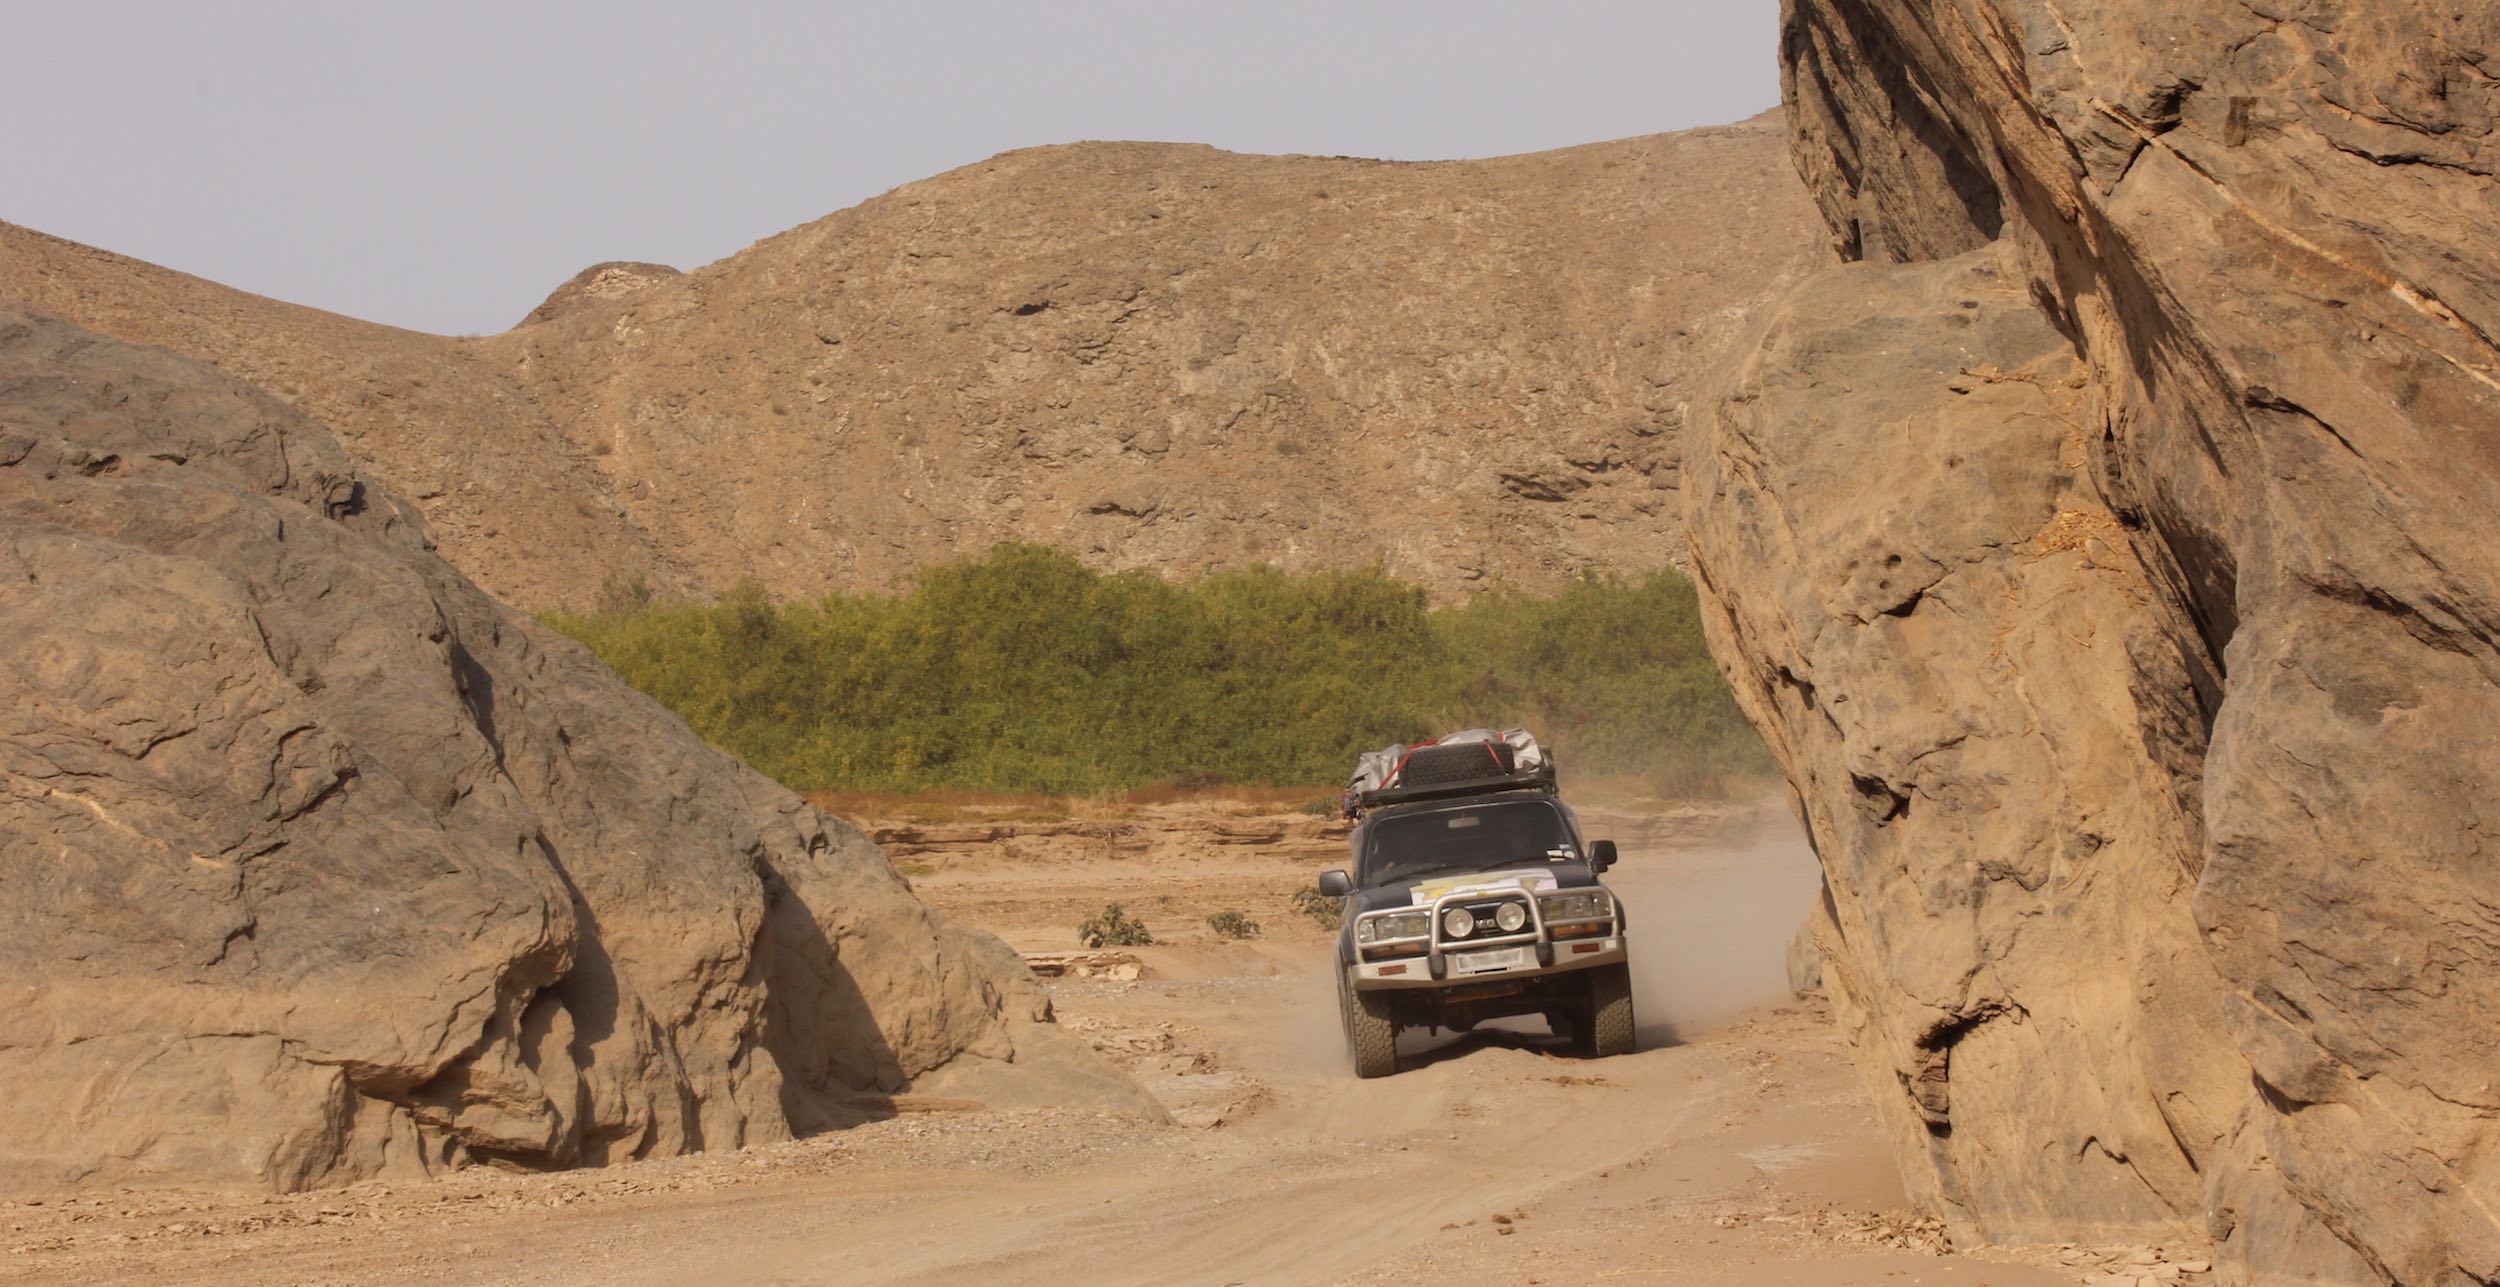 A landcruiser drives through thick sand along a dry riverbed in northern Namibia.